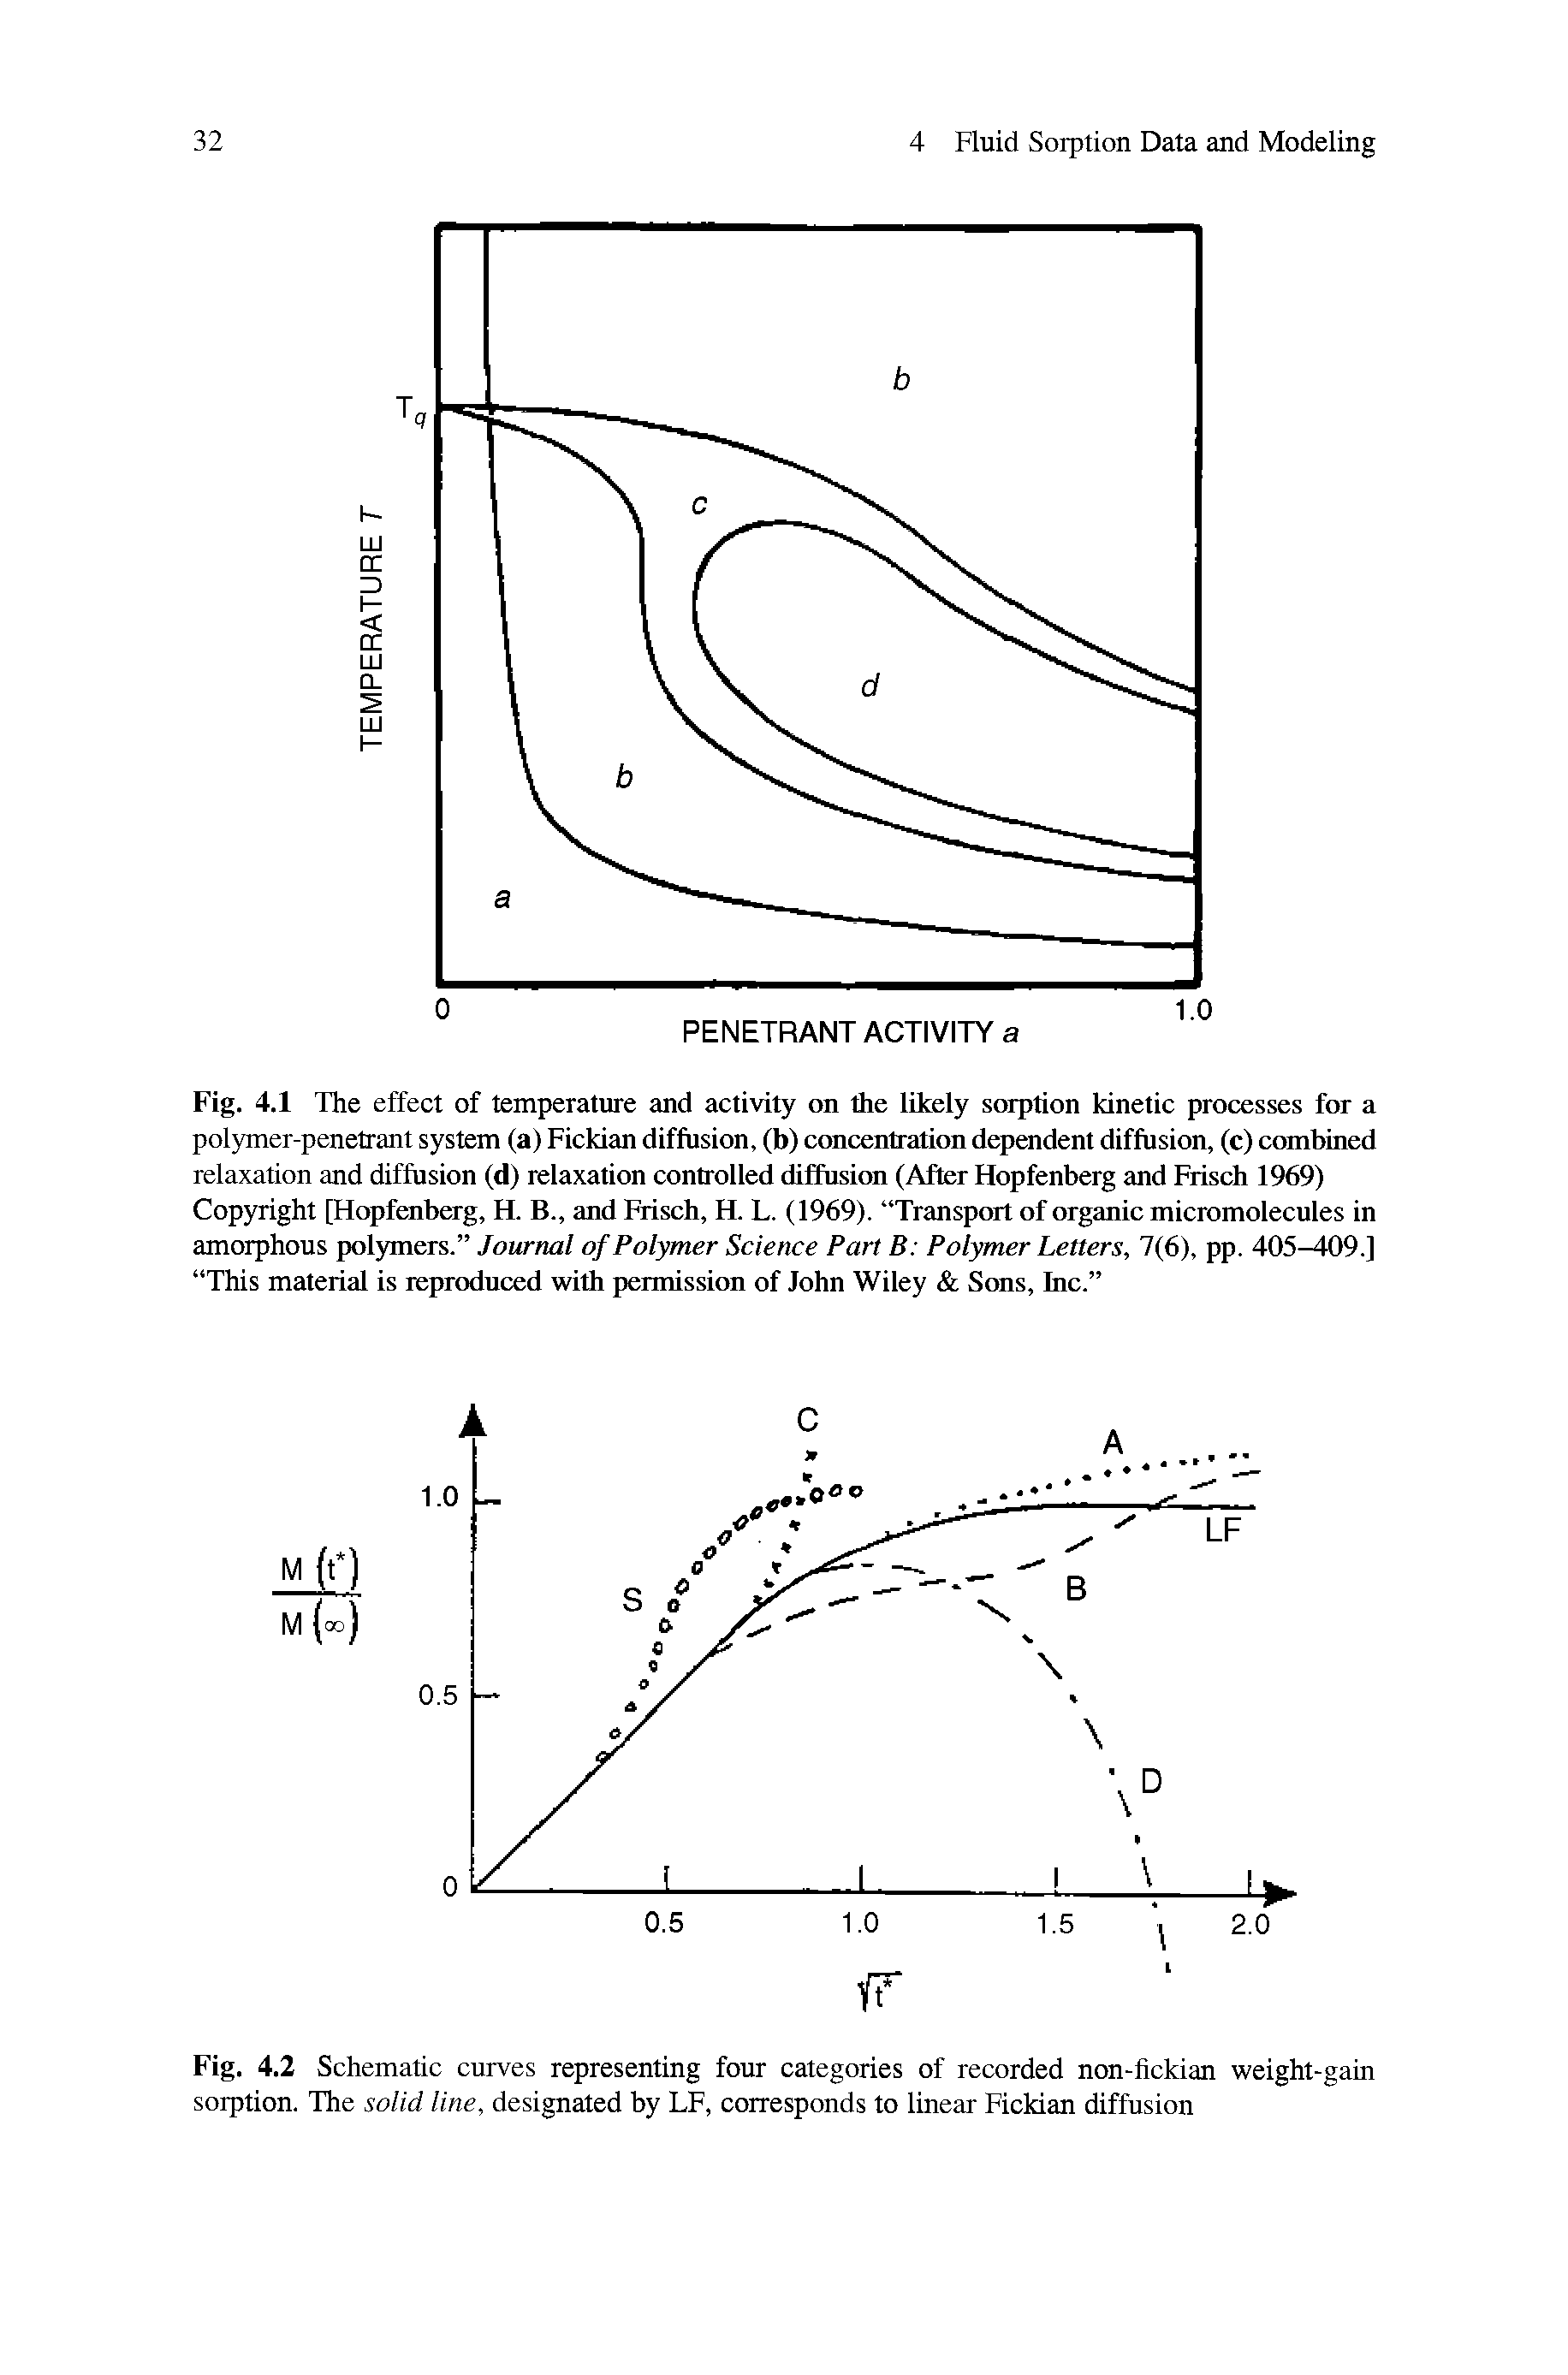 Fig. 4.2 Schematic curves representing four categories of recorded non-fickian weight-gain sorption. The solid line, designated by LF, corresponds to linear Fickian diffusion...